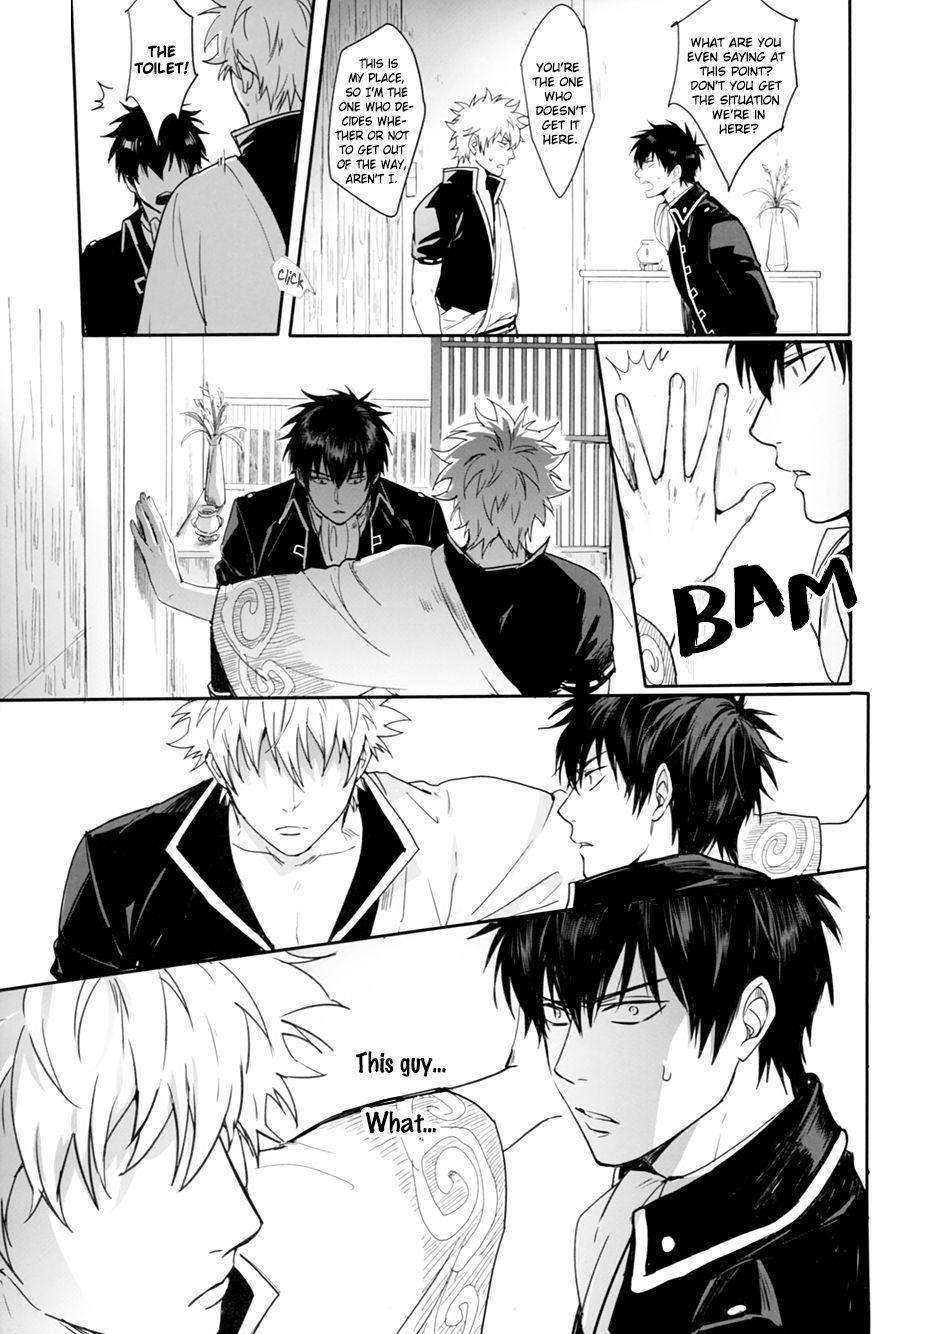 Rough Sex Porn UNTIME BOMB - Gintama Behind - Page 4